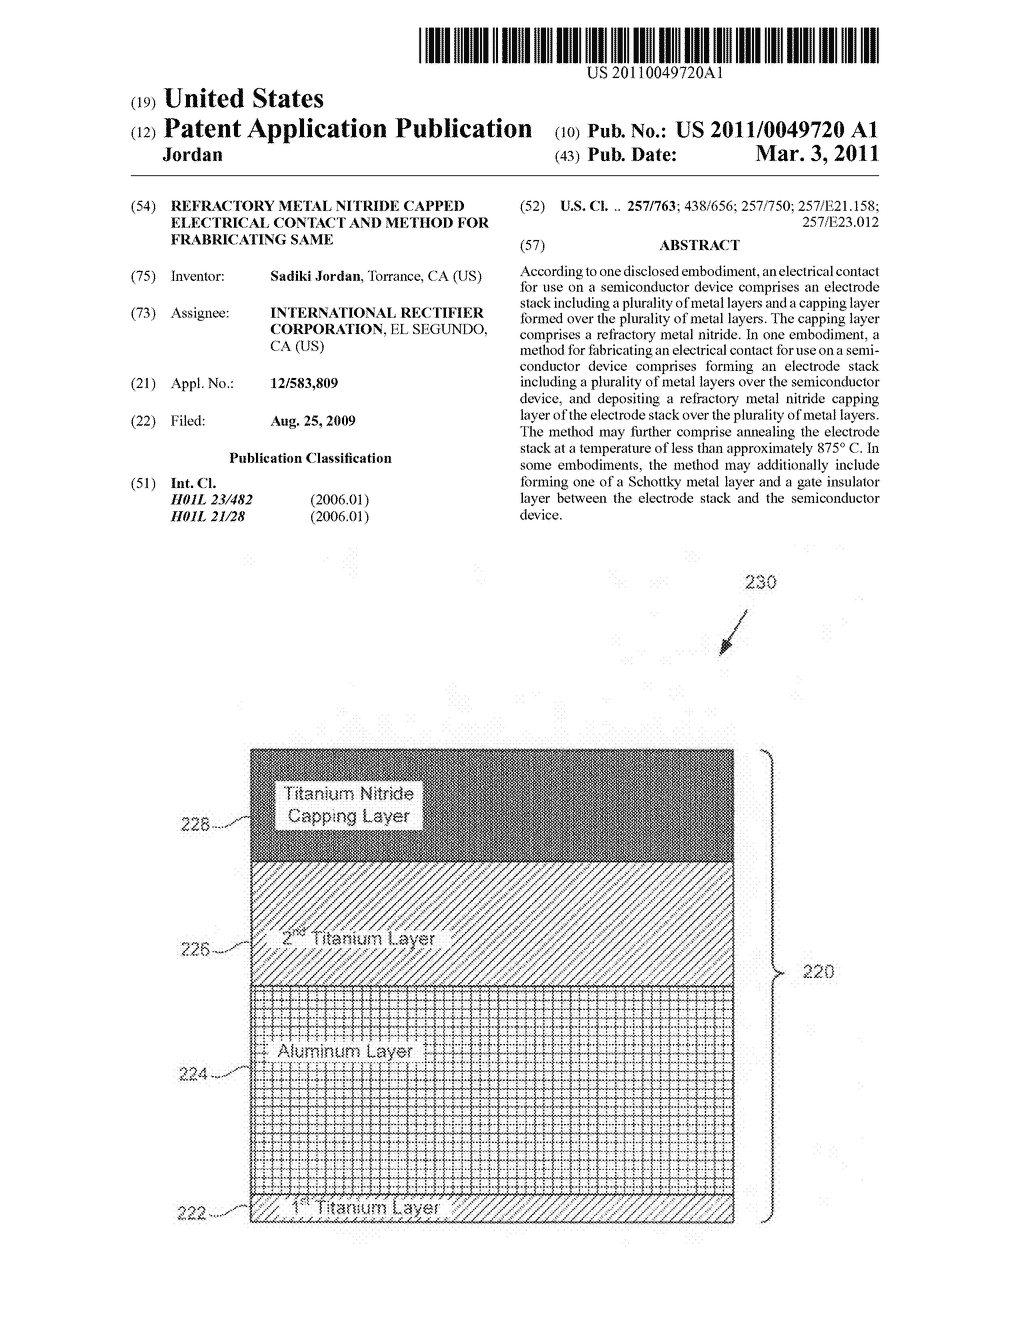 Refractory metal nitride capped electrical contact and method for frabricating same - diagram, schematic, and image 01